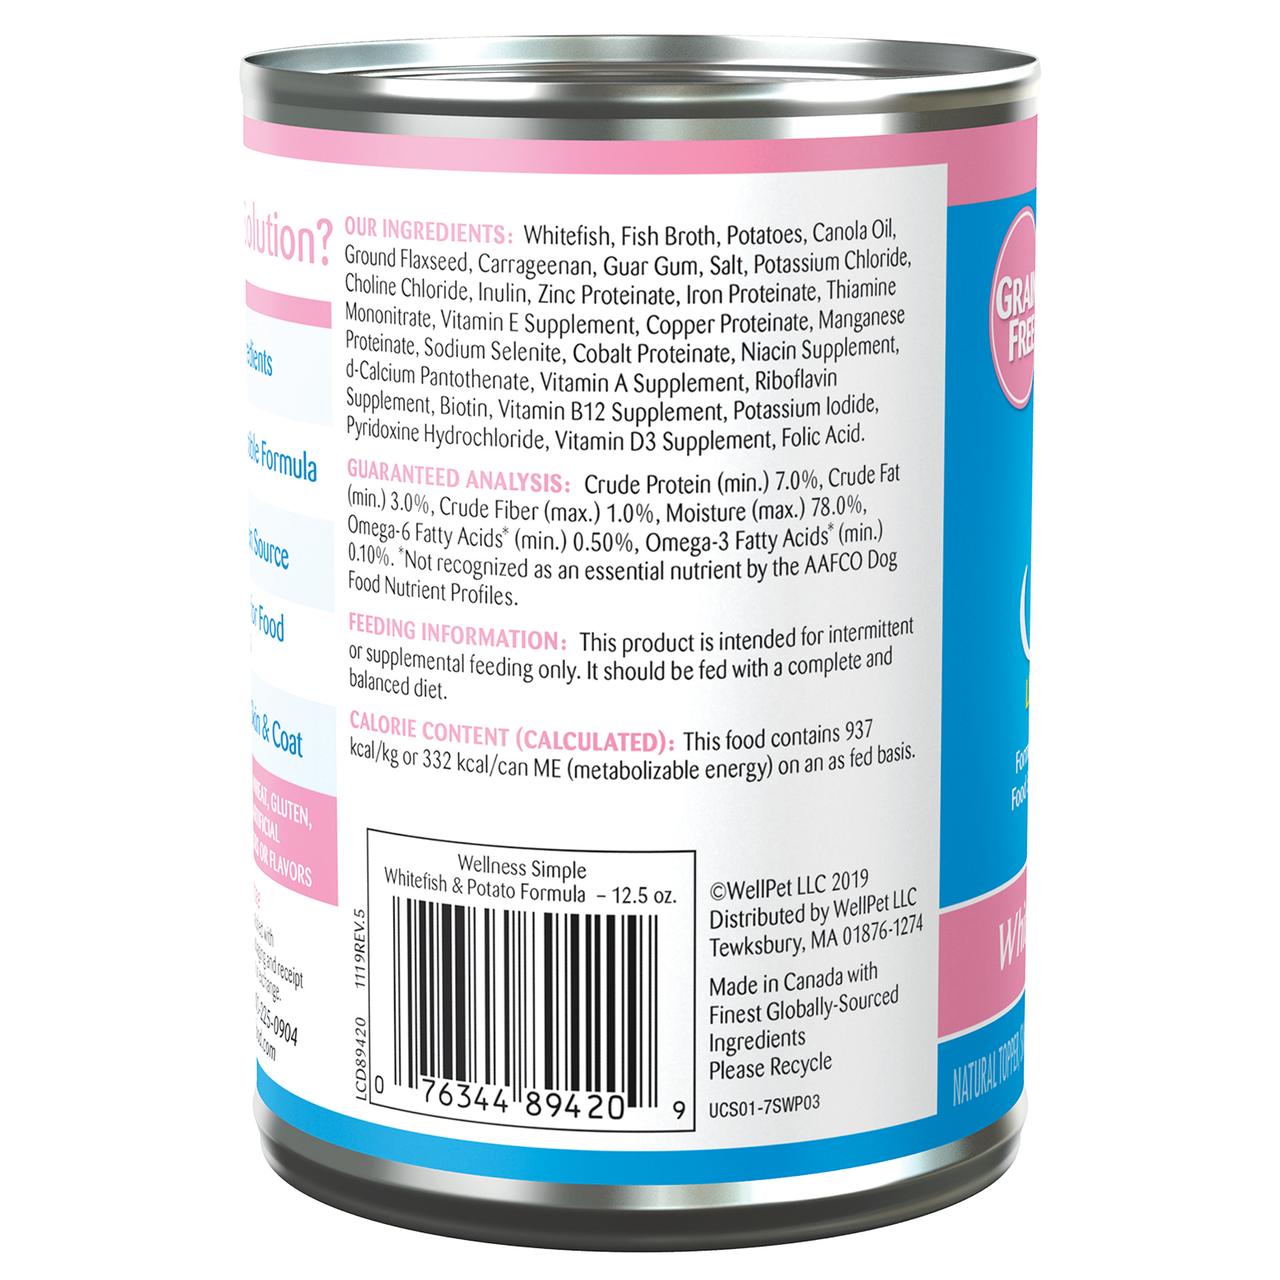 Wellness Simple Natural Wet Canned Limited Ingredient Dog Food, Whitefish & Potato, 12.5-Ounce Can (Pack of 12) - image 3 of 8